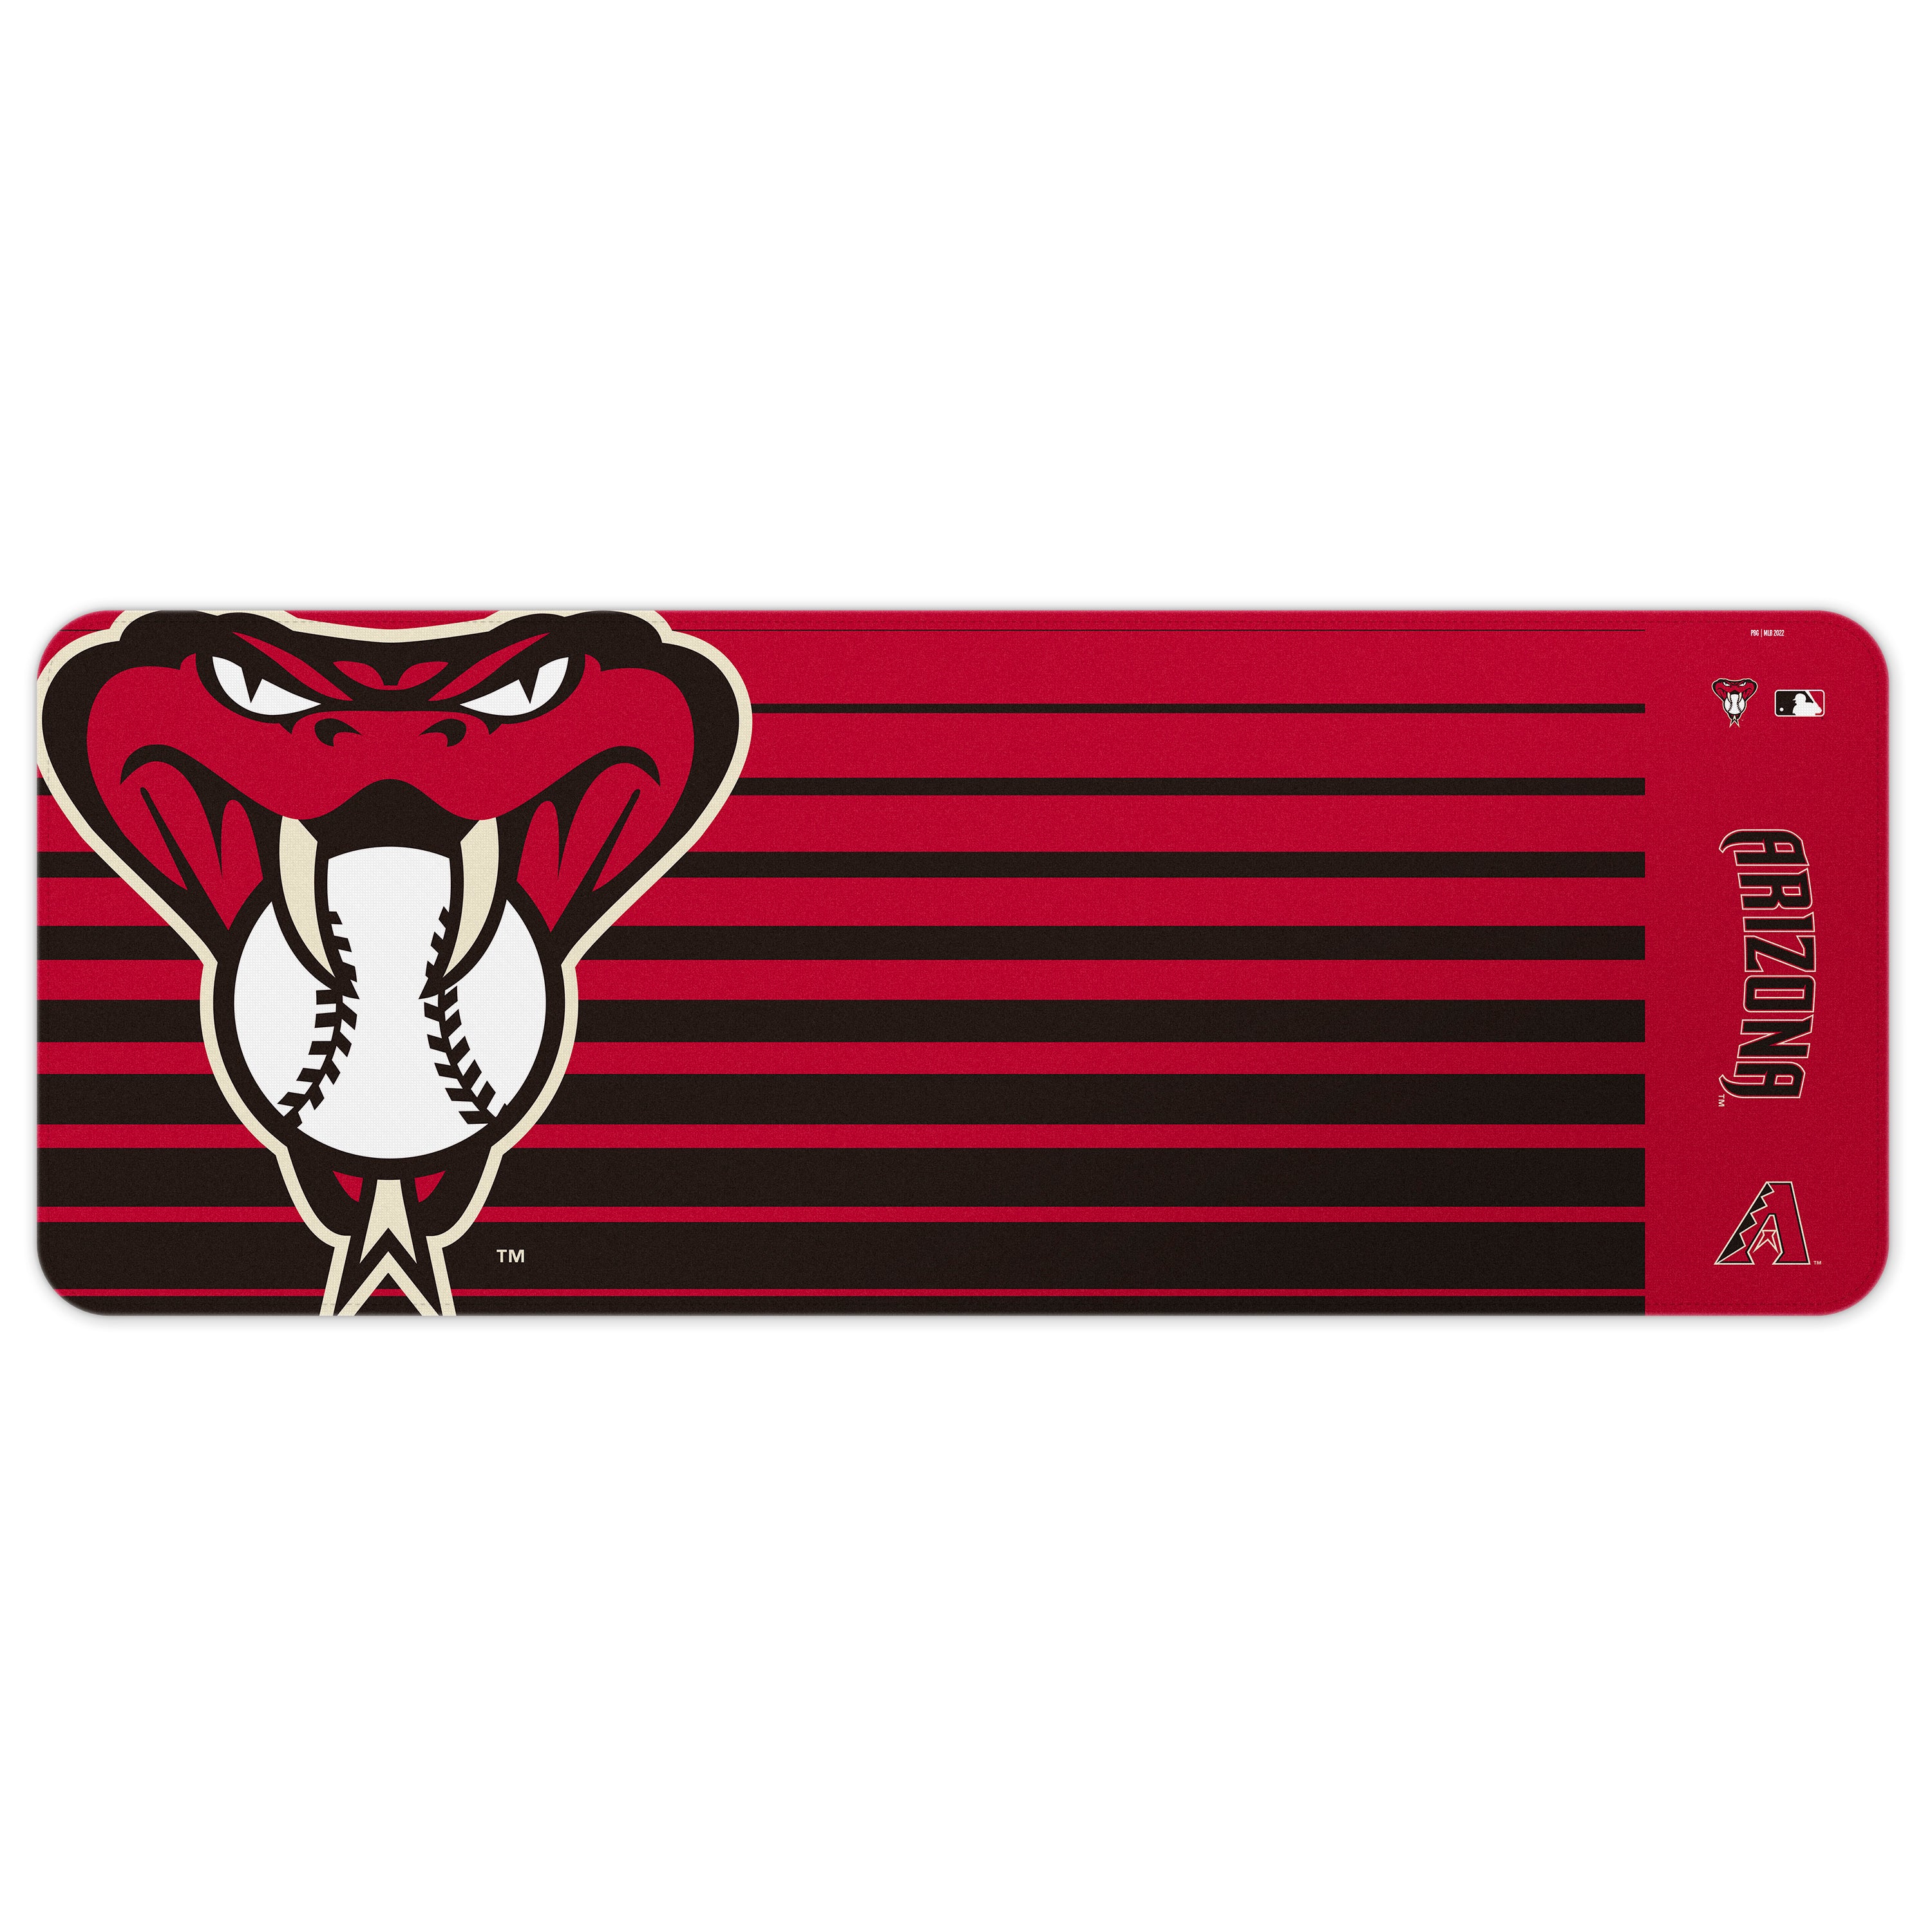 Mlb St. Louis Cardinals Airpods Case Cover : Target